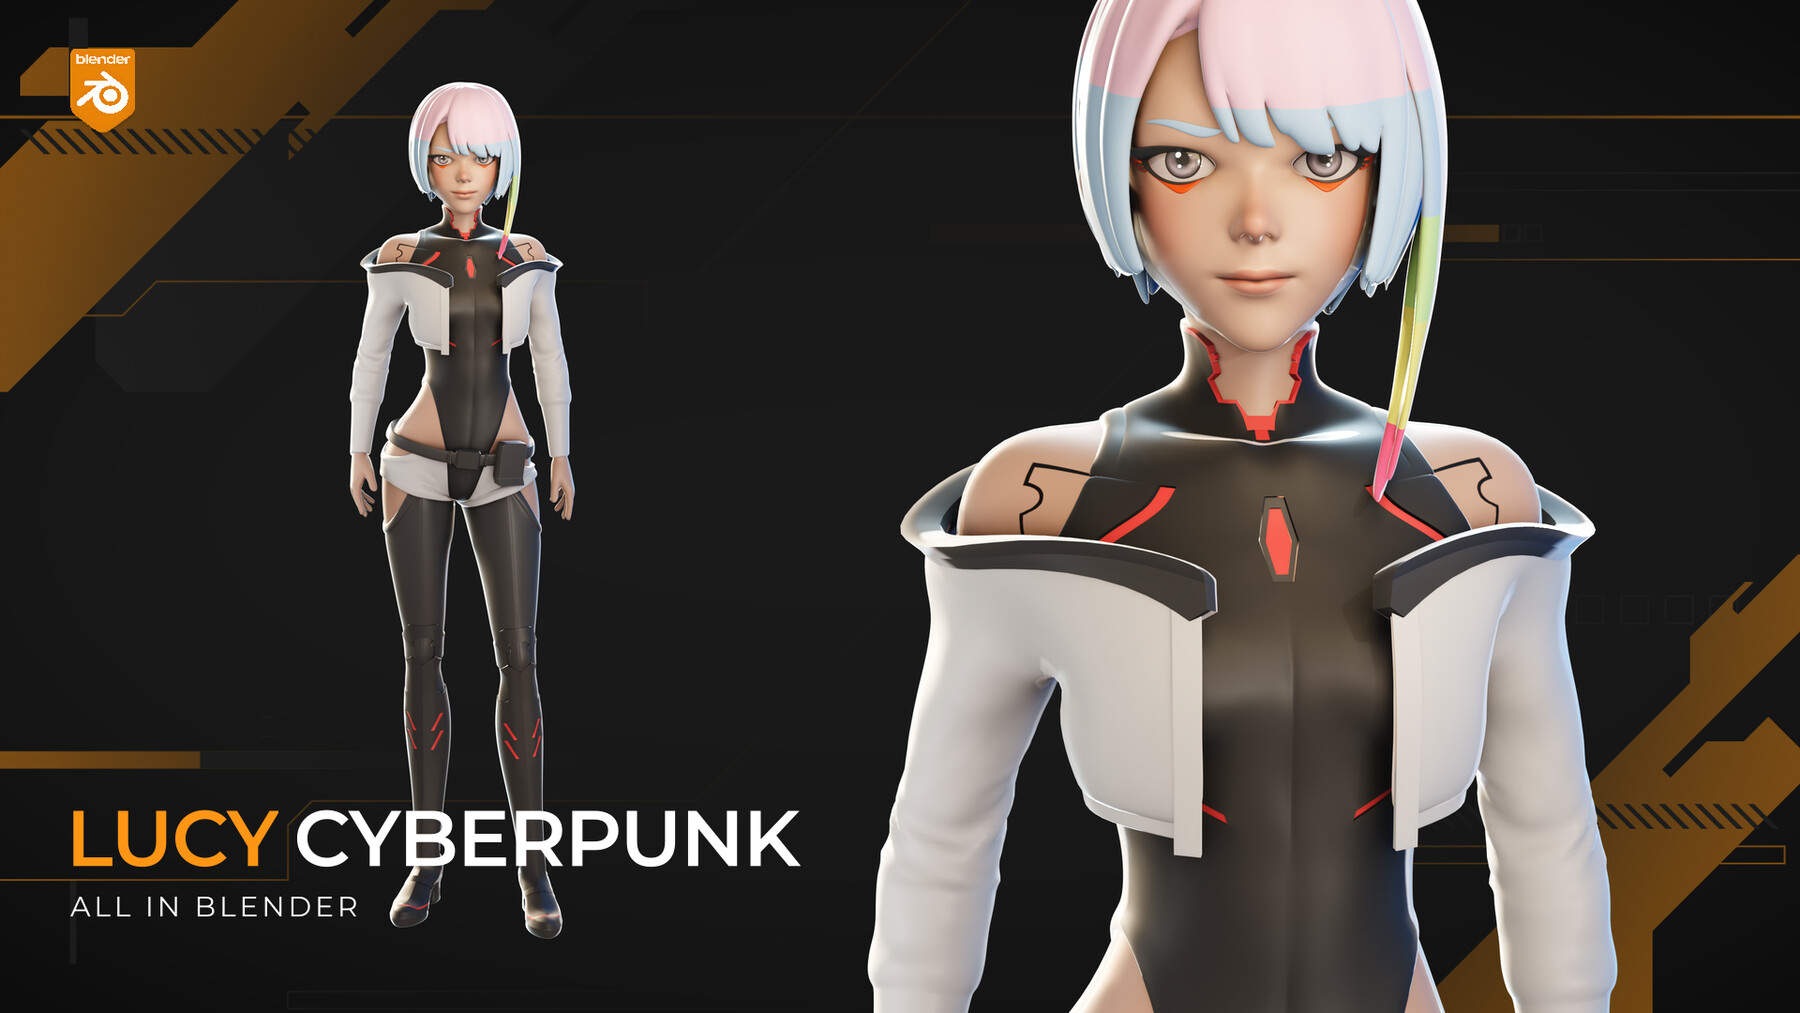 Cyberpunk: Edgerunners Will Feature Characters From The Game